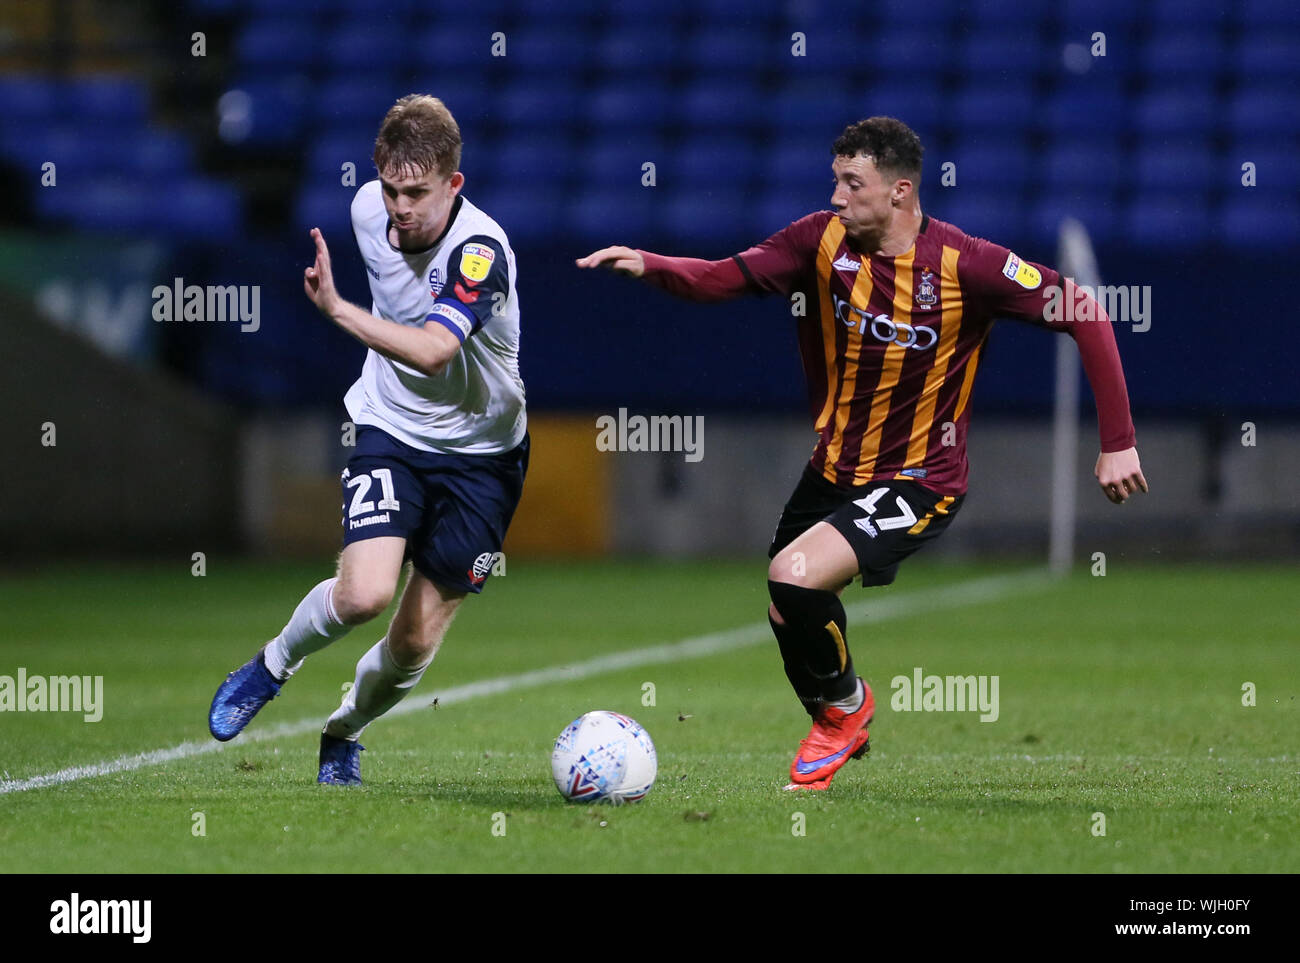 Bolton Wanderers' Harry Brockbank and Bradford City's Jordan Gibson (right)  battle for the ball during the EFL Trophy Northern Section Group F match at  the University of Bolton Stadium Stock Photo -